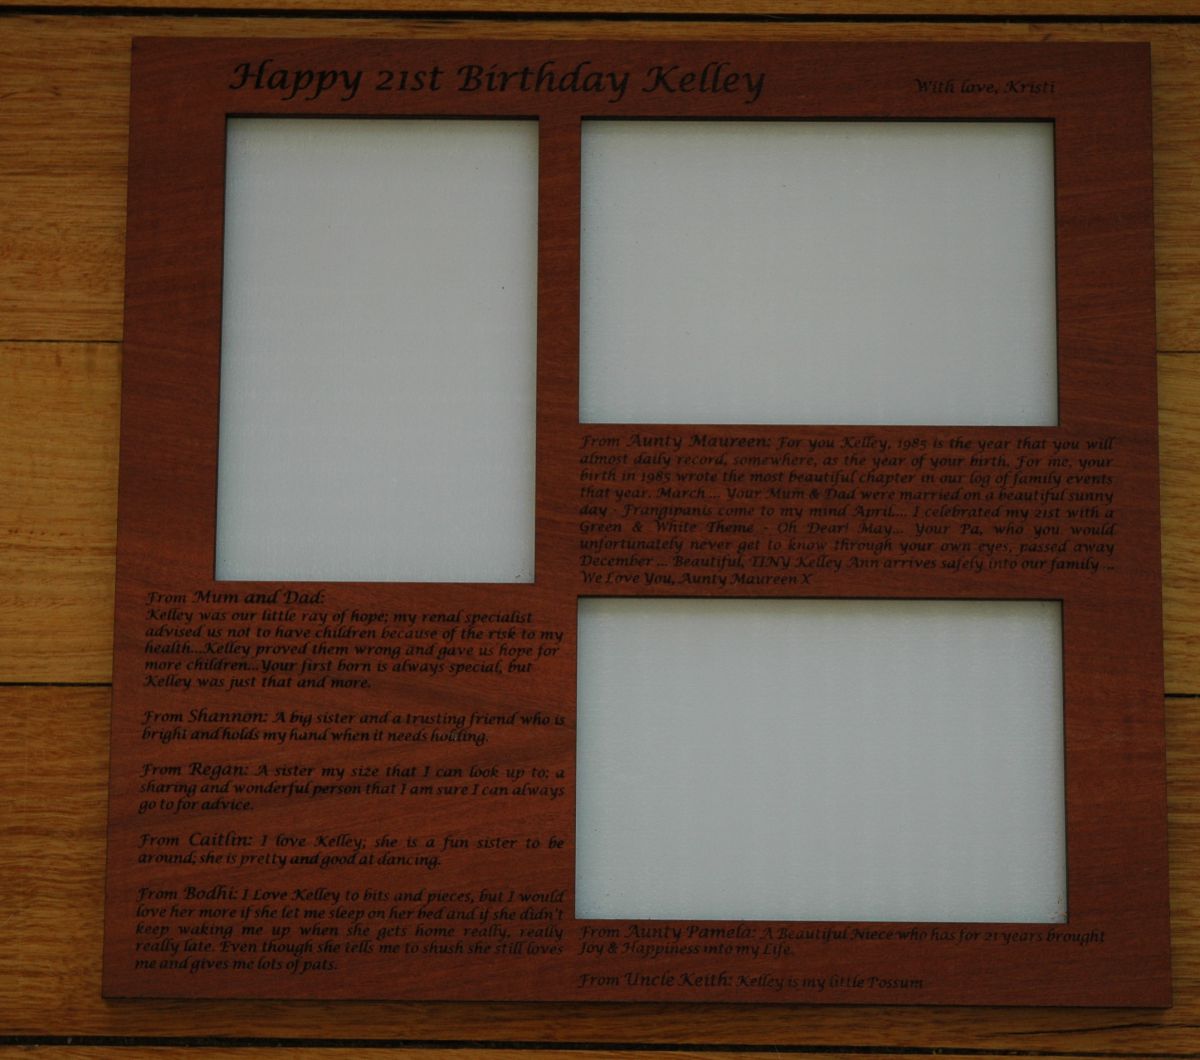 Red gum photo frame engraved 3 photo's